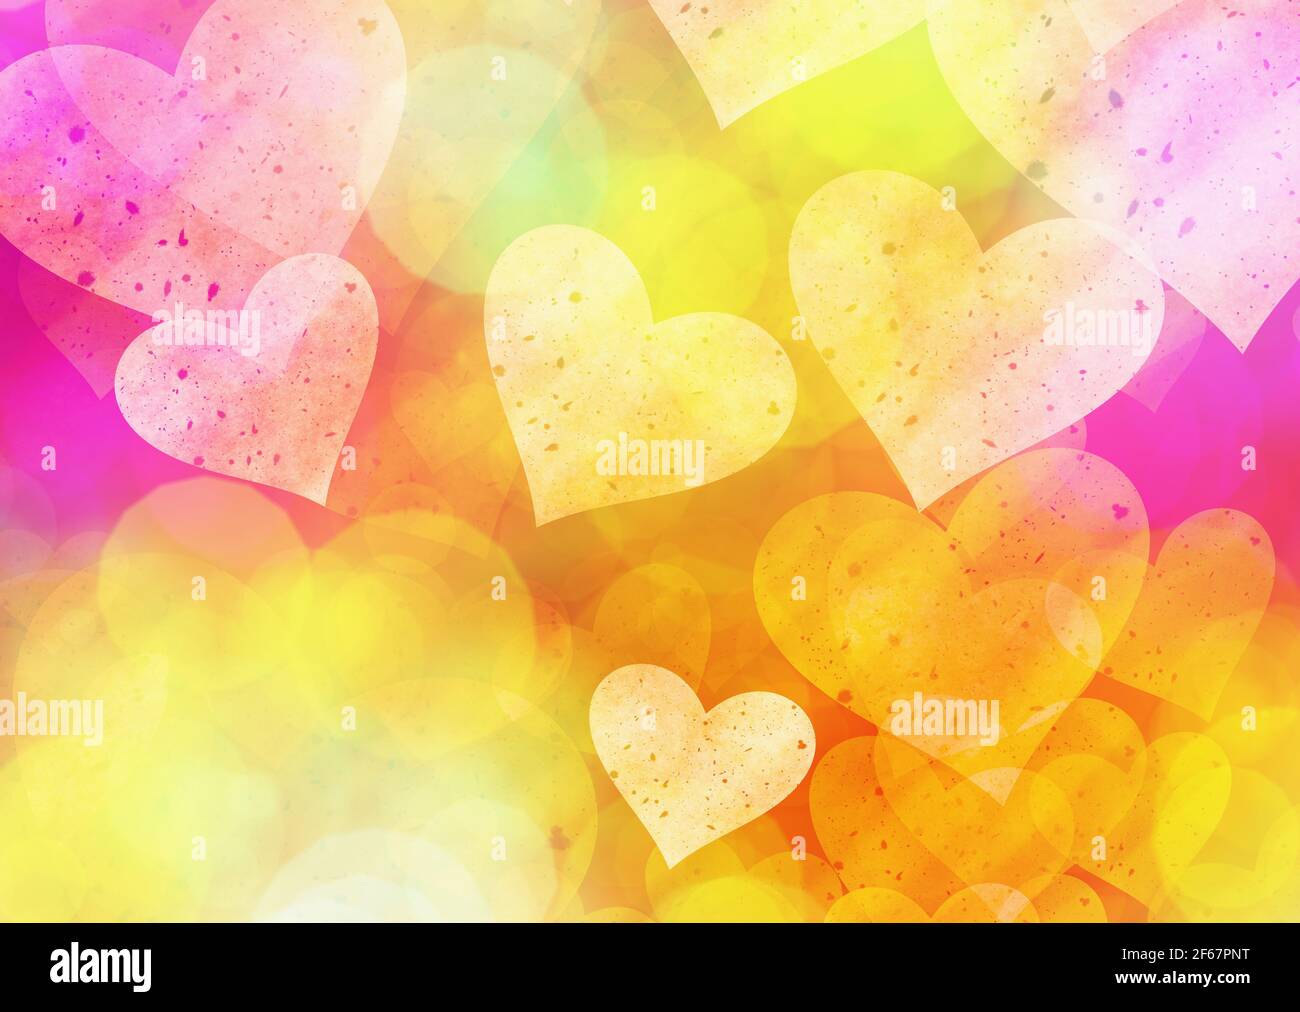 multicolored painted hearts backgrounds with dreamy light Stock Photo